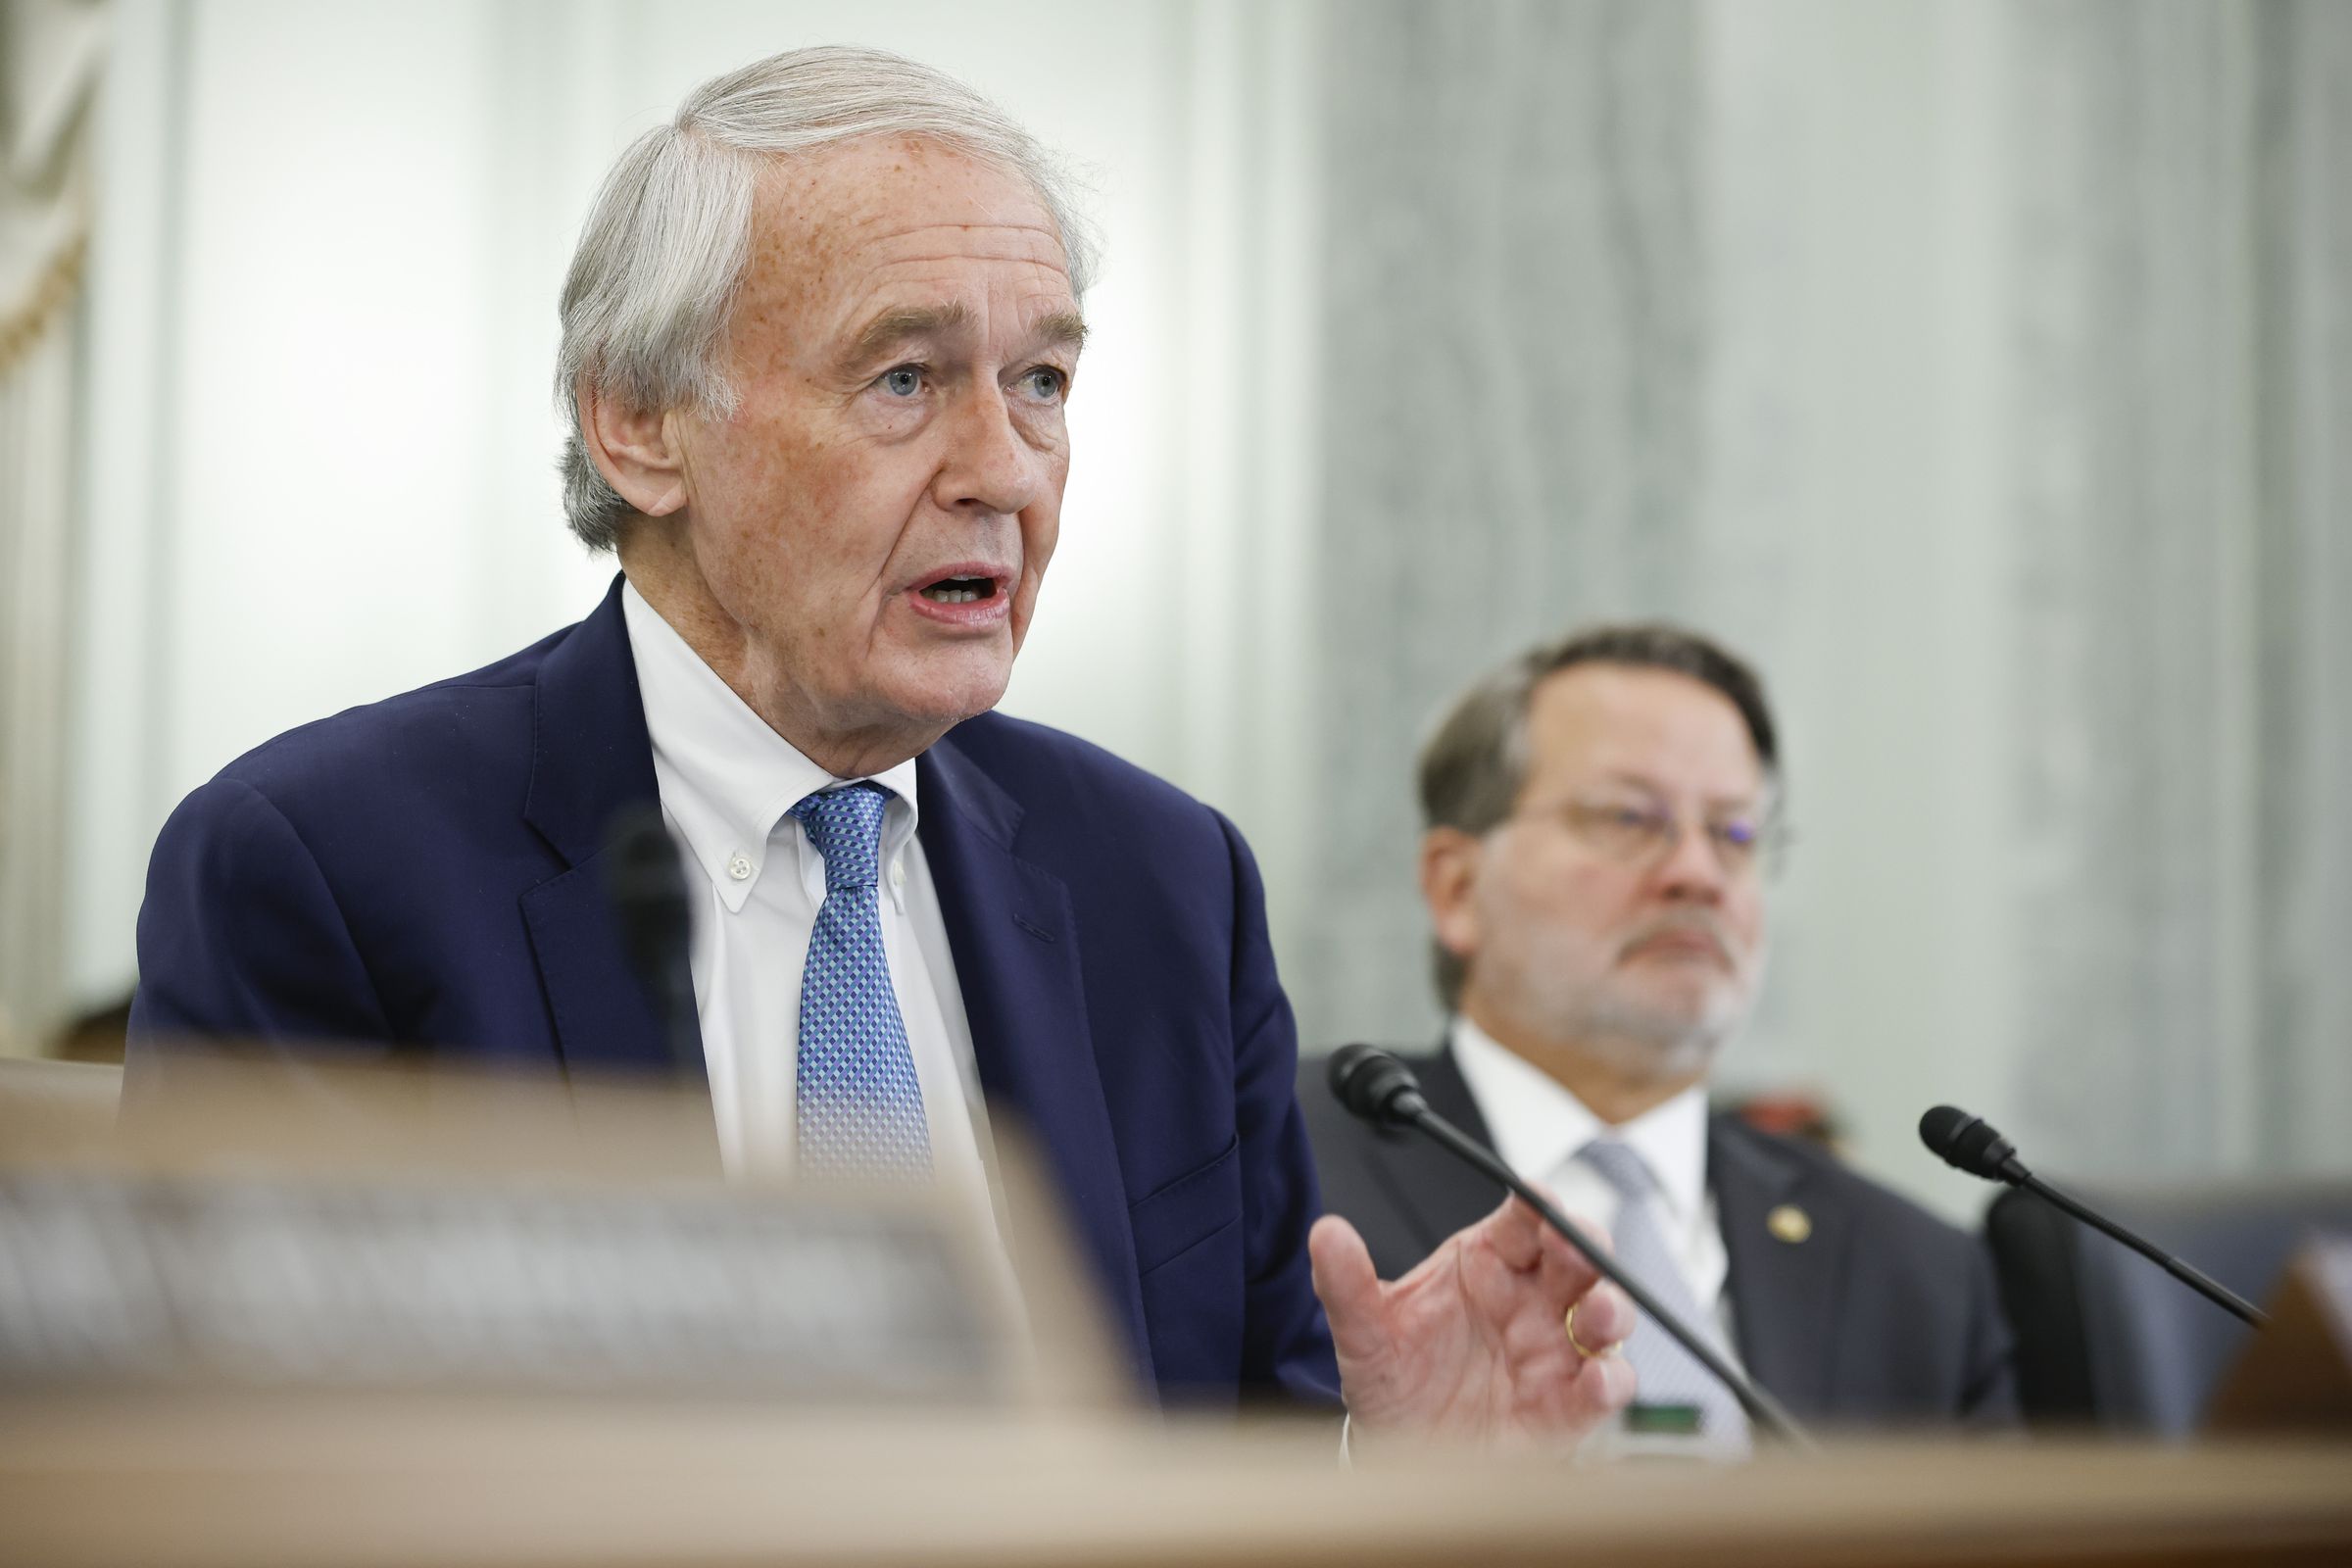 Sen. Ed Markey speaks as part of a congressional committee